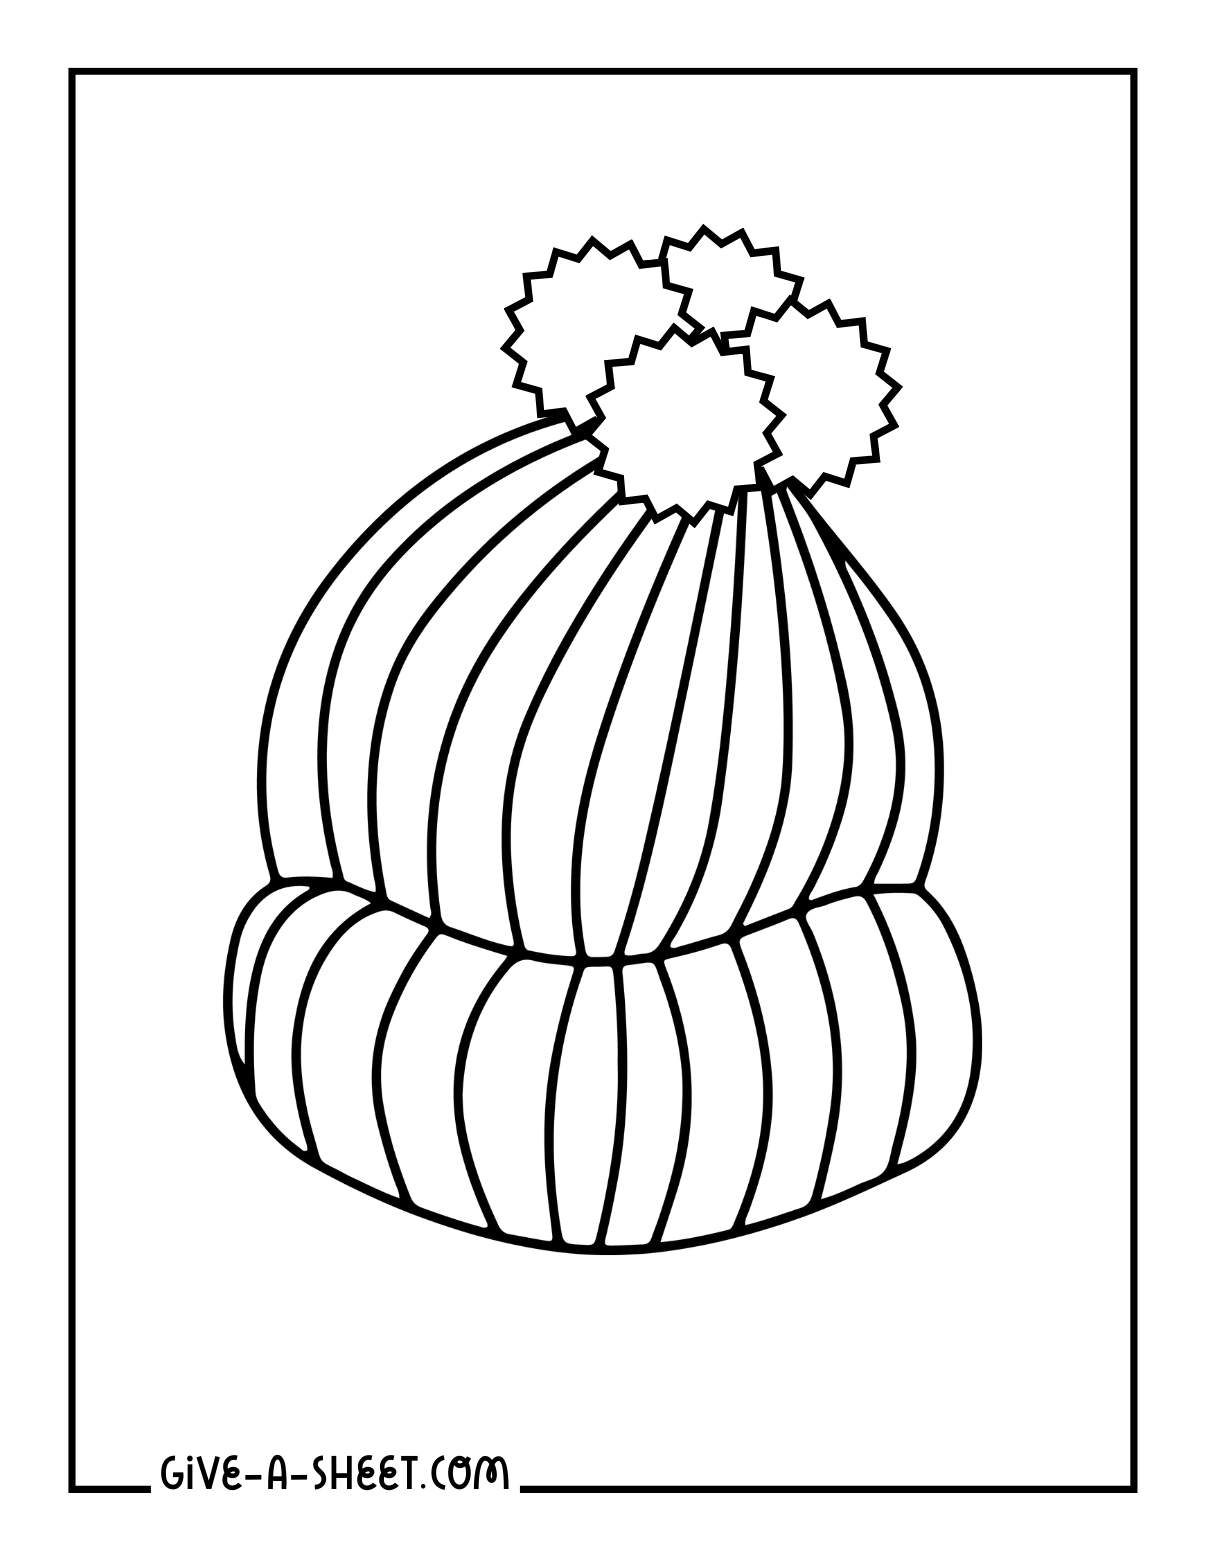 Simple winter hat for cold coloring page.